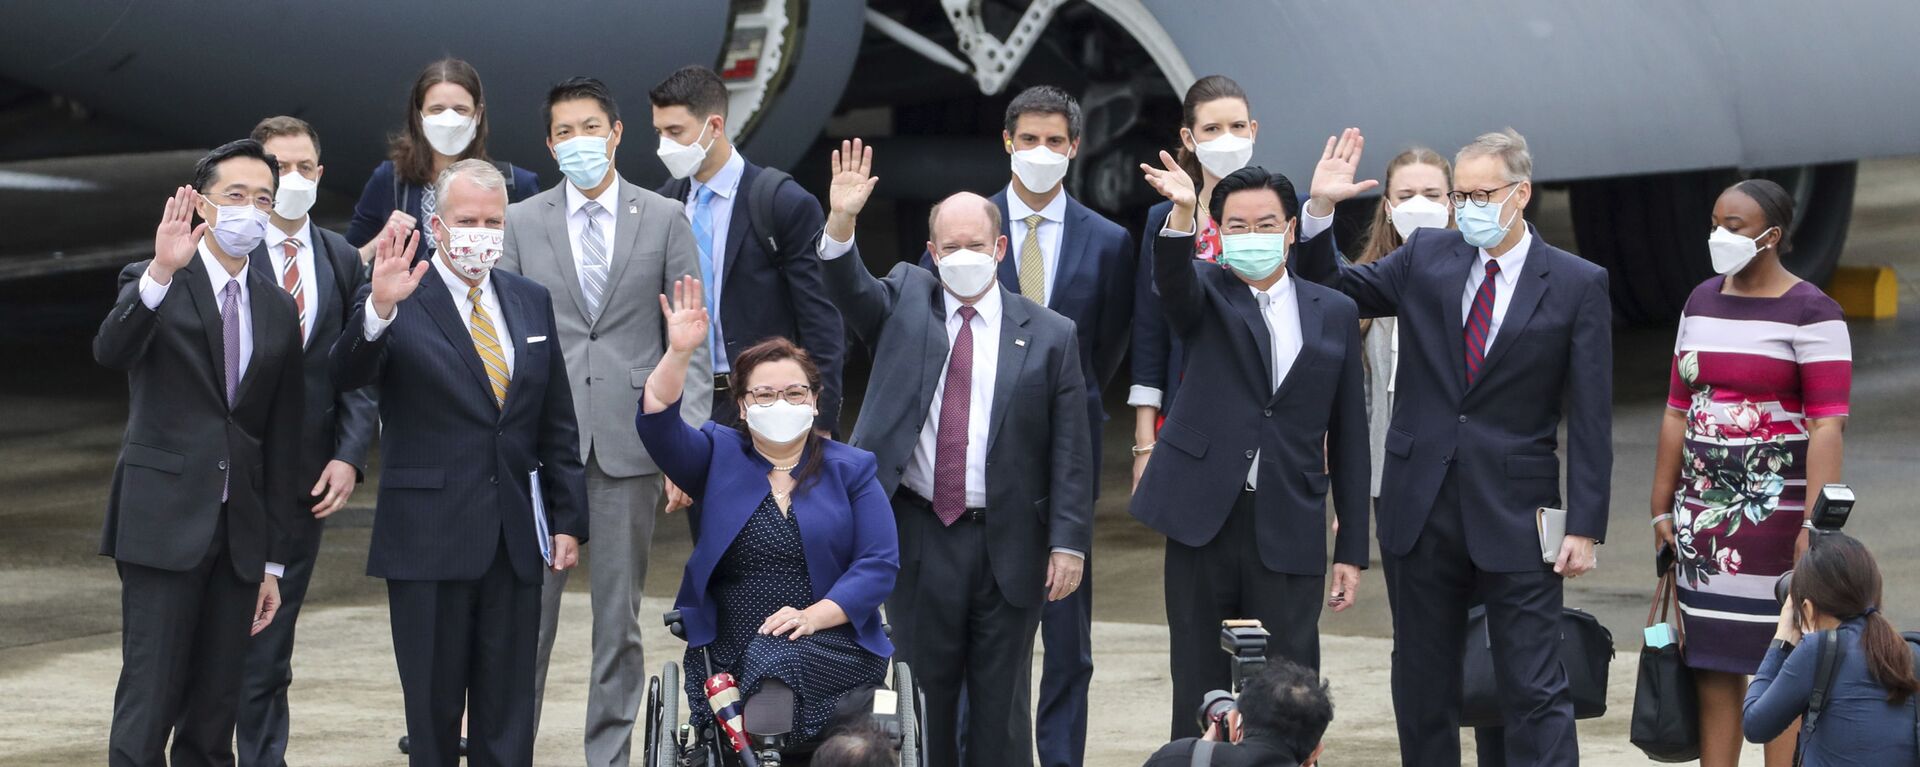 Taiwan's Foreign Minister Joseph Wu, fourth from right, waves with U.S. senators to his right Democratic Sen. Christopher Coons of Delaware, a member of the Foreign Relations Committee, Democratic Sen. Tammy Duckworth of Illinois and Republican Sen. Dan Sullivan of Alaska, members of the Armed Services Committee on their arrival at the Songshan Airport in Taipei, Taiwan on Sunday, June 6, 2021 - Sputnik International, 1920, 08.06.2021